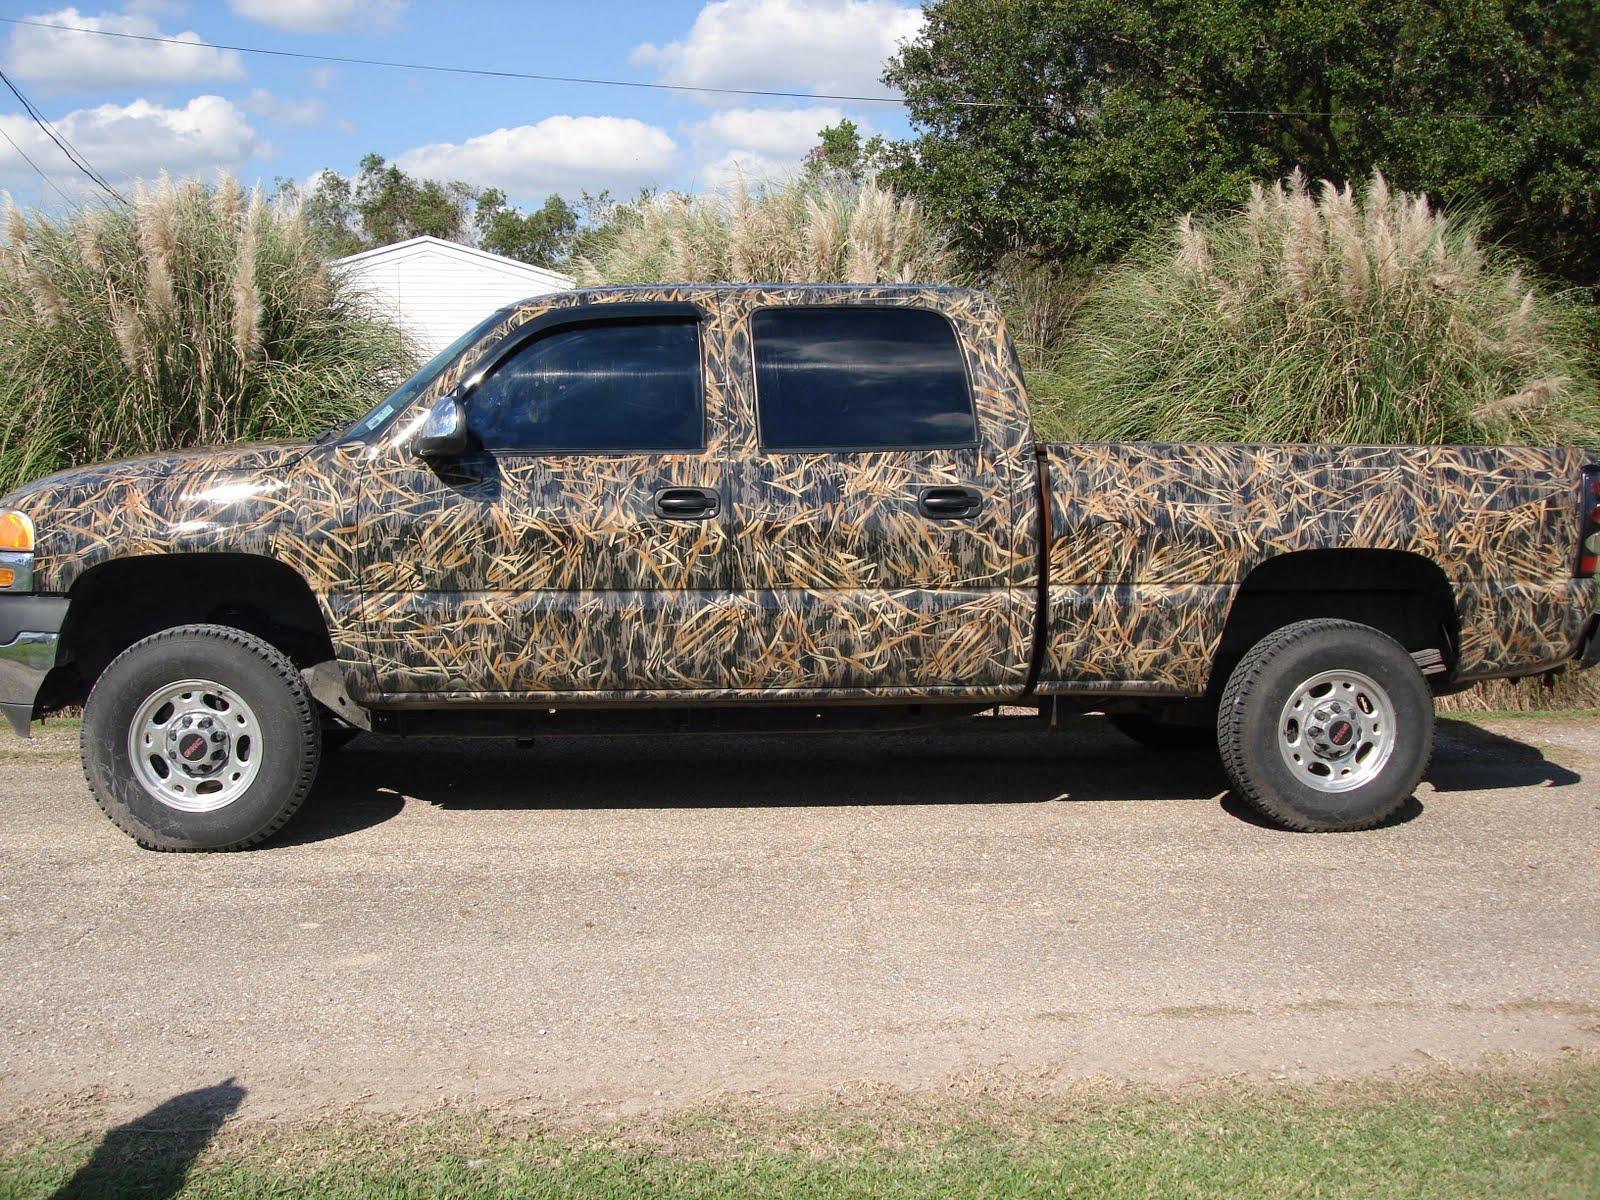 Camo Duramax Logo - My Name Is Jacques: The Color of Passion and Camouflage